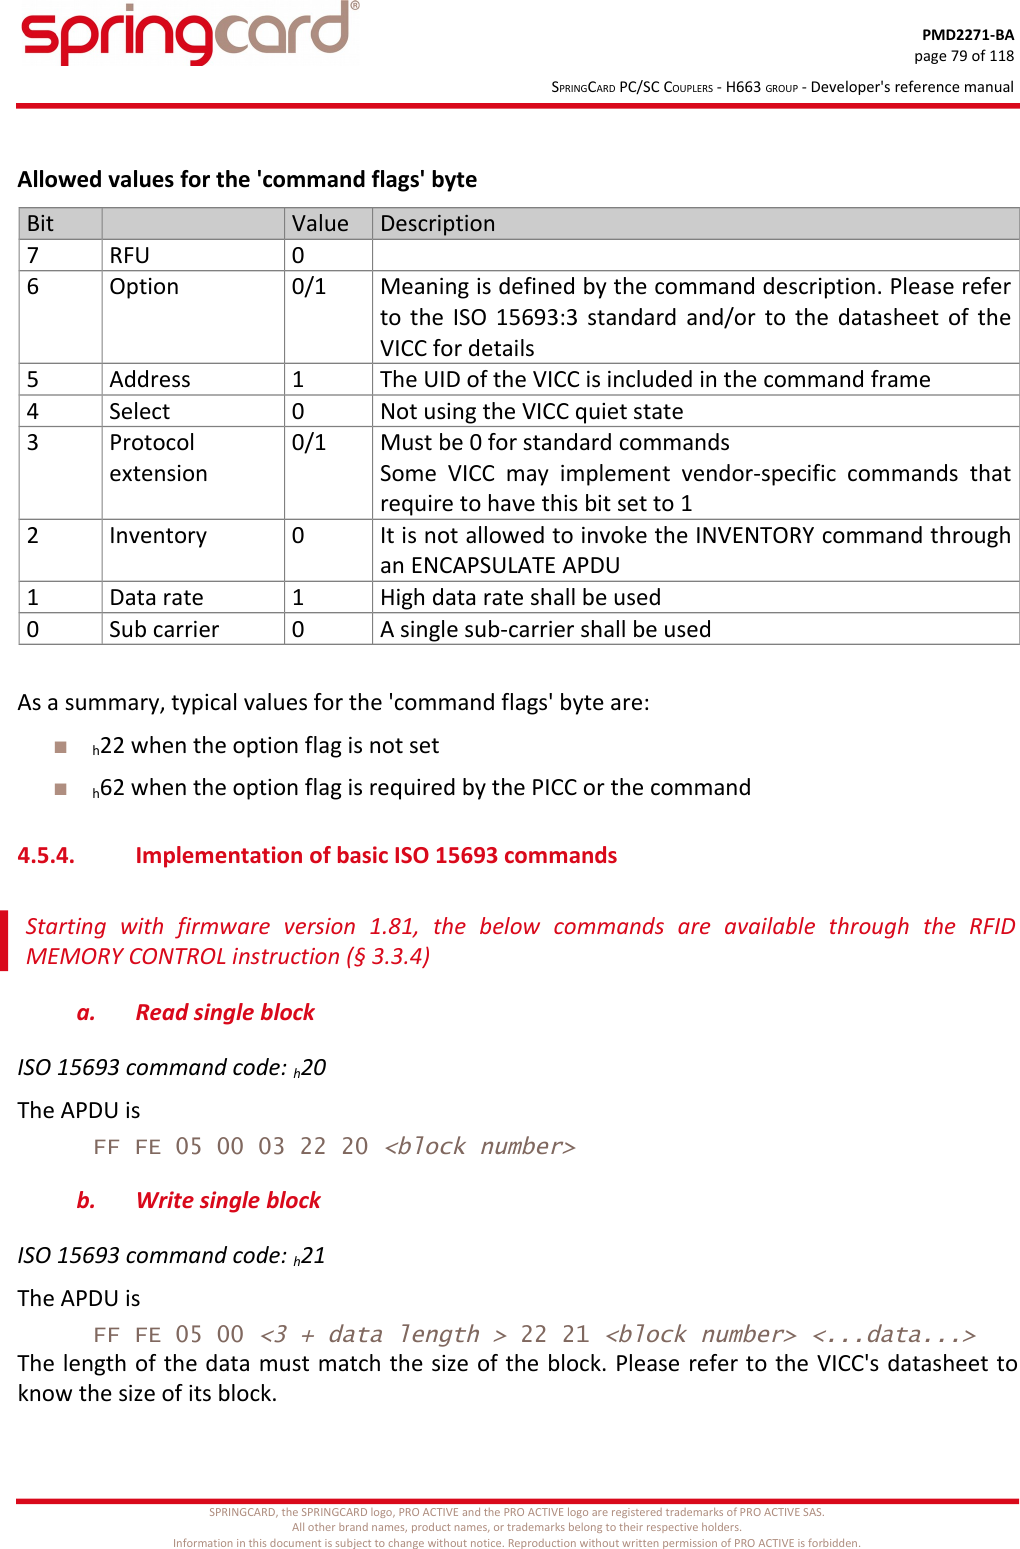 PMD2271-BApage 79 of 118SPRINGCARD PC/SC COUPLERS - H663 GROUP - Developer&apos;s reference manualAllowed values for the &apos;command flags&apos; byteBit Value Description7 RFU 06 Option 0/1 Meaning is defined by the command description. Please referto the ISO 15693:3 standard and/or to the datasheet of theVICC for details5 Address 1 The UID of the VICC is included in the command frame4 Select 0 Not using the VICC quiet state3 Protocolextension0/1 Must be 0 for standard commandsSome  VICC  may  implement  vendor-specific  commands   thatrequire to have this bit set to 12 Inventory 0 It is not allowed to invoke the INVENTORY command throughan ENCAPSULATE APDU1 Data rate 1 High data rate shall be used0 Sub carrier 0 A single sub-carrier shall be usedAs a summary, typical values for the &apos;command flags&apos; byte are:h22 when the option flag is not seth62 when the option flag is required by the PICC or the command4.5.4. Implementation of basic ISO 15693 commandsStarting   with   firmware   version   1.81,   the   below   commands   are   available   through   the   RFIDMEMORY CONTROL instruction (§ 3.3.4)a. Read single blockISO 15693 command code: h20The APDU isFF FE 05 00 03 22 20 &lt;block number&gt;b. Write single blockISO 15693 command code: h21The APDU isFF FE 05 00 &lt;3 + data length &gt; 22 21 &lt;block number&gt; &lt;...data...&gt;The length of the data must match the size of the block. Please refer to the VICC&apos;s datasheet toknow the size of its block.SPRINGCARD, the SPRINGCARD logo, PRO ACTIVE and the PRO ACTIVE logo are registered trademarks of PRO ACTIVE SAS.All other brand names, product names, or trademarks belong to their respective holders.Information in this document is subject to change without notice. Reproduction without written permission of PRO ACTIVE is forbidden.